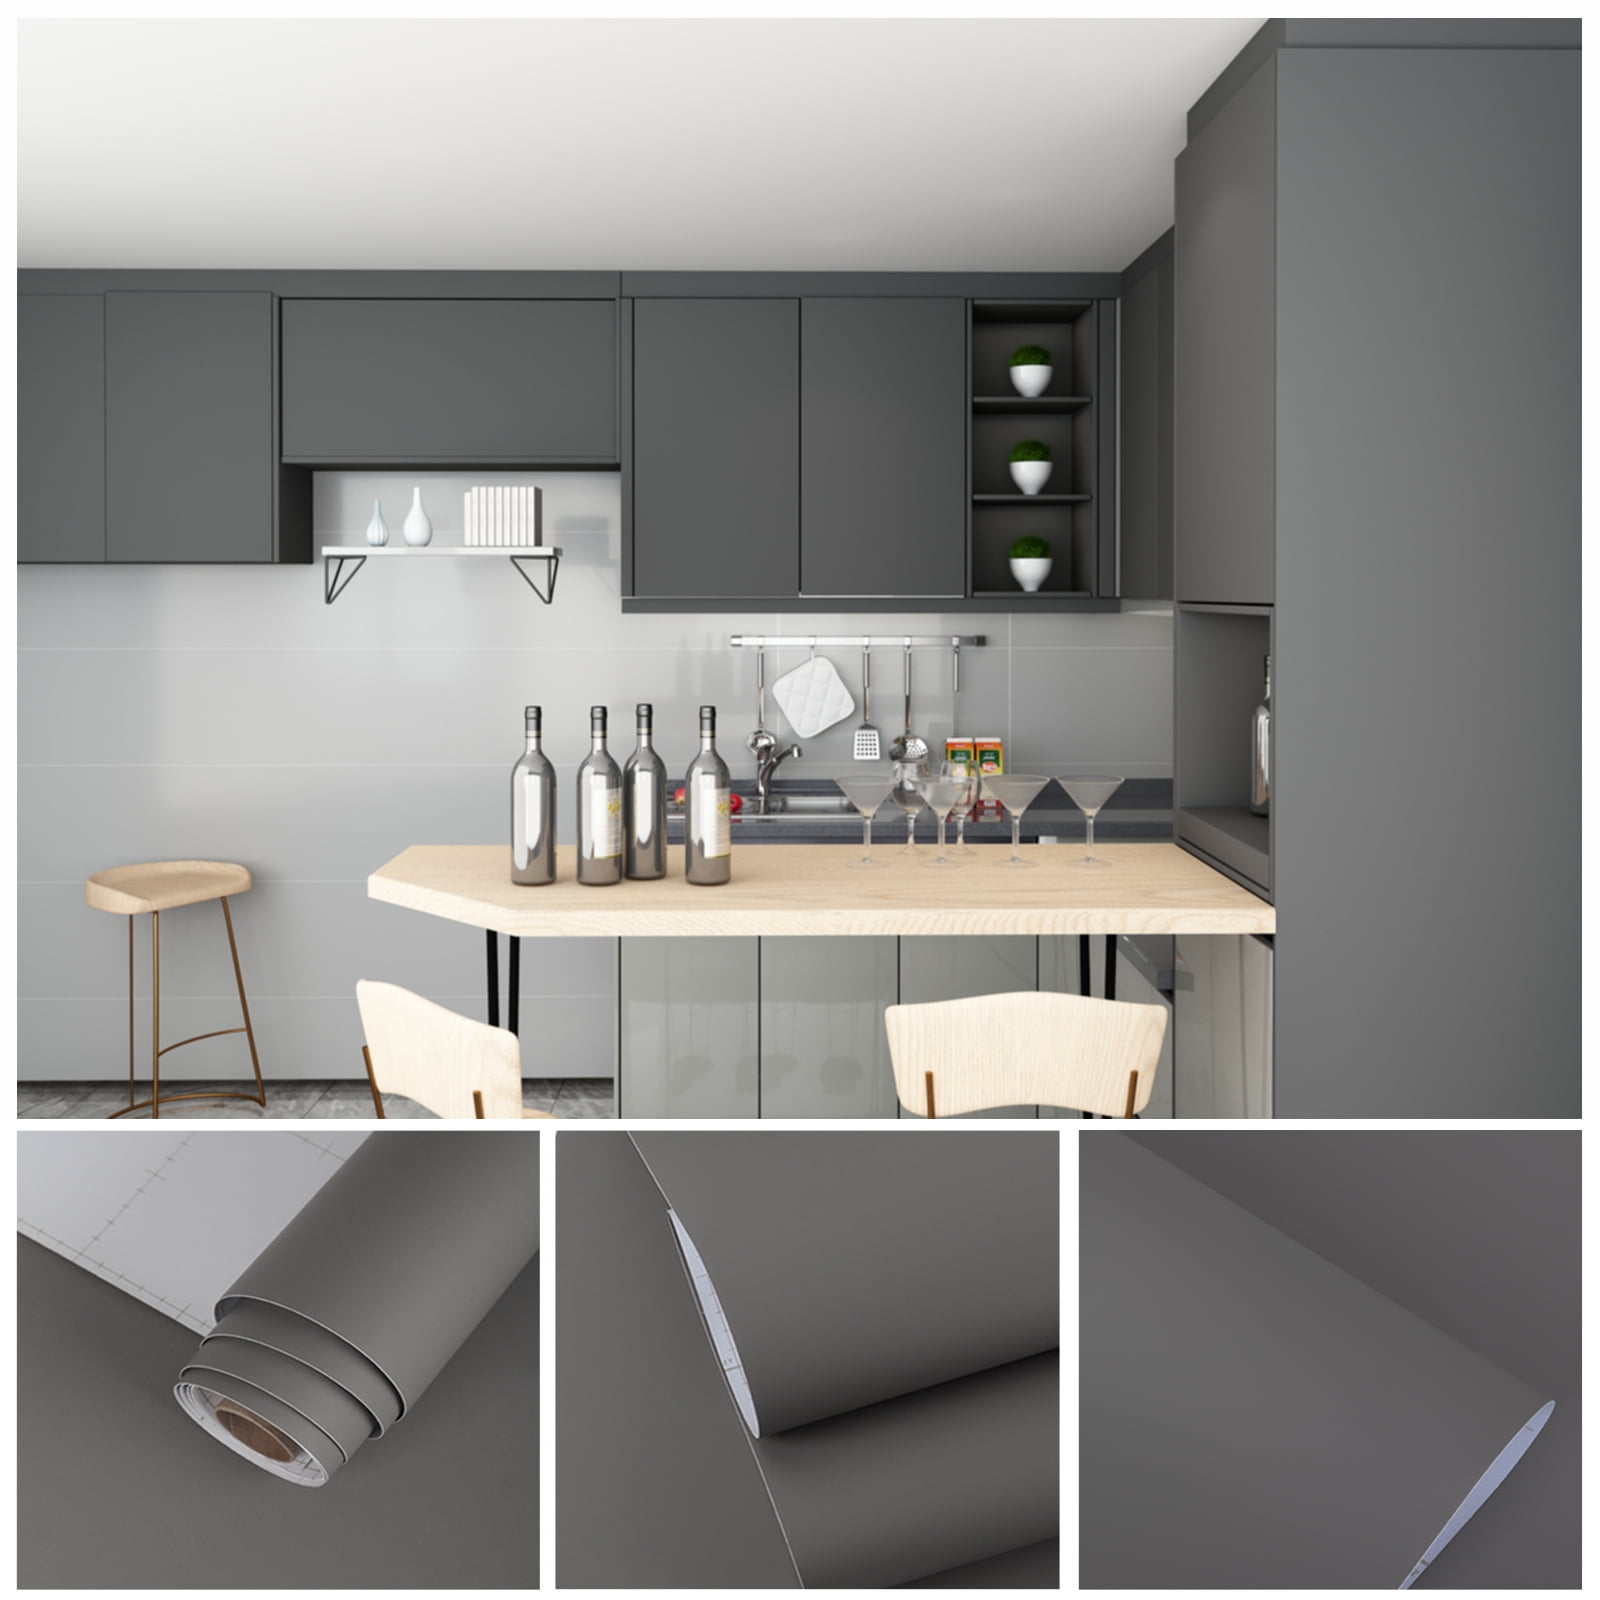 Veelike Grey Contact Paper 15 7 X118, Kitchen Cabinet Contact Paper Removable